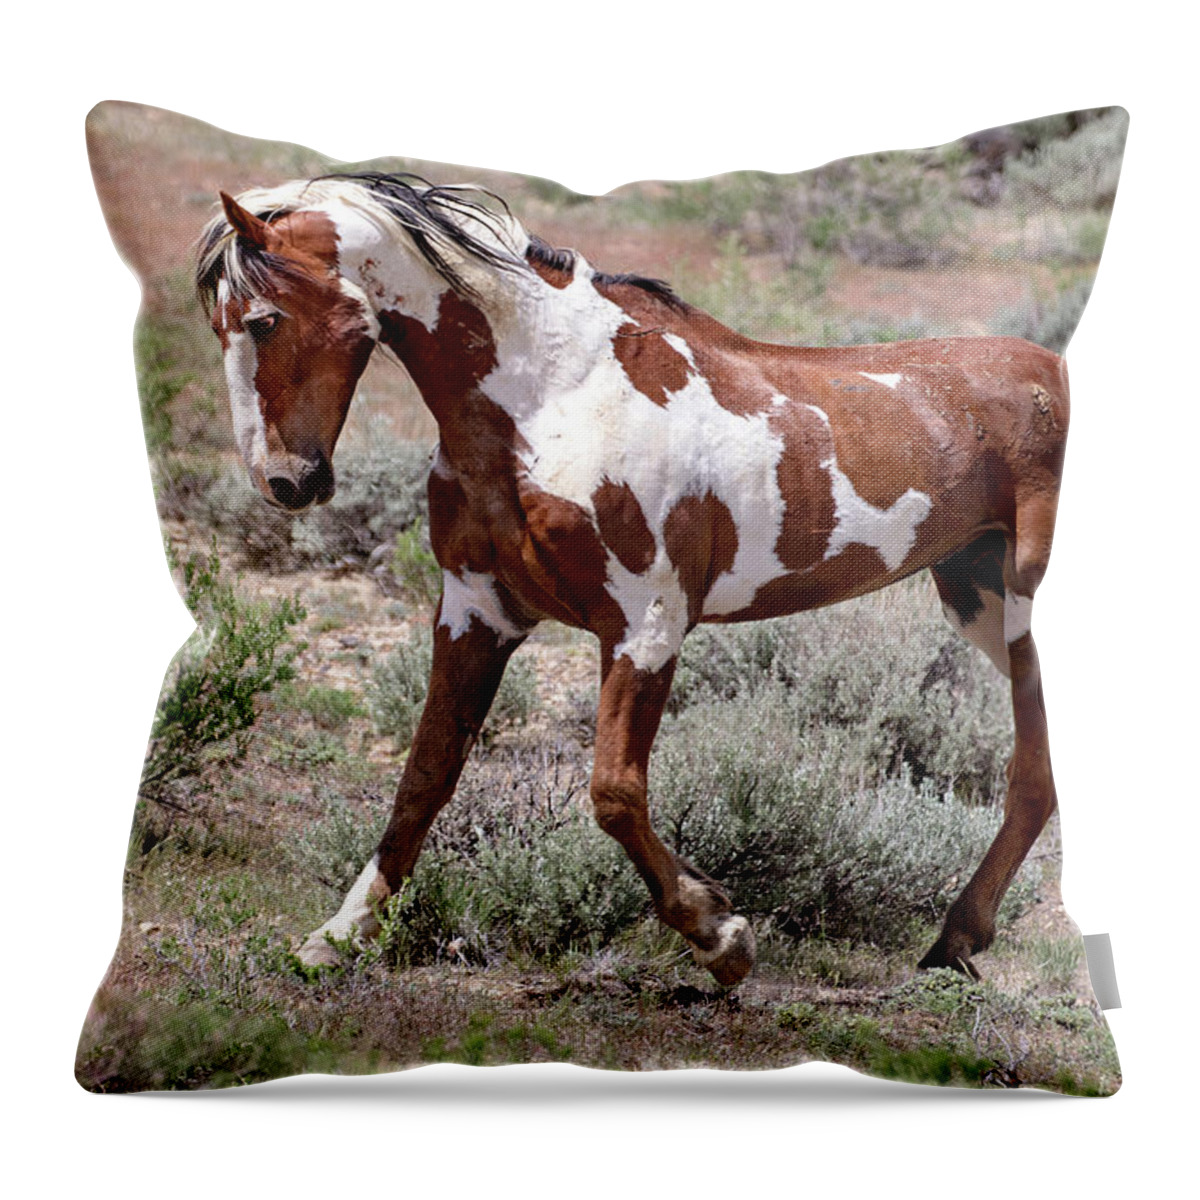 Pinto Throw Pillow featuring the photograph Mustang Power by Mindy Musick King